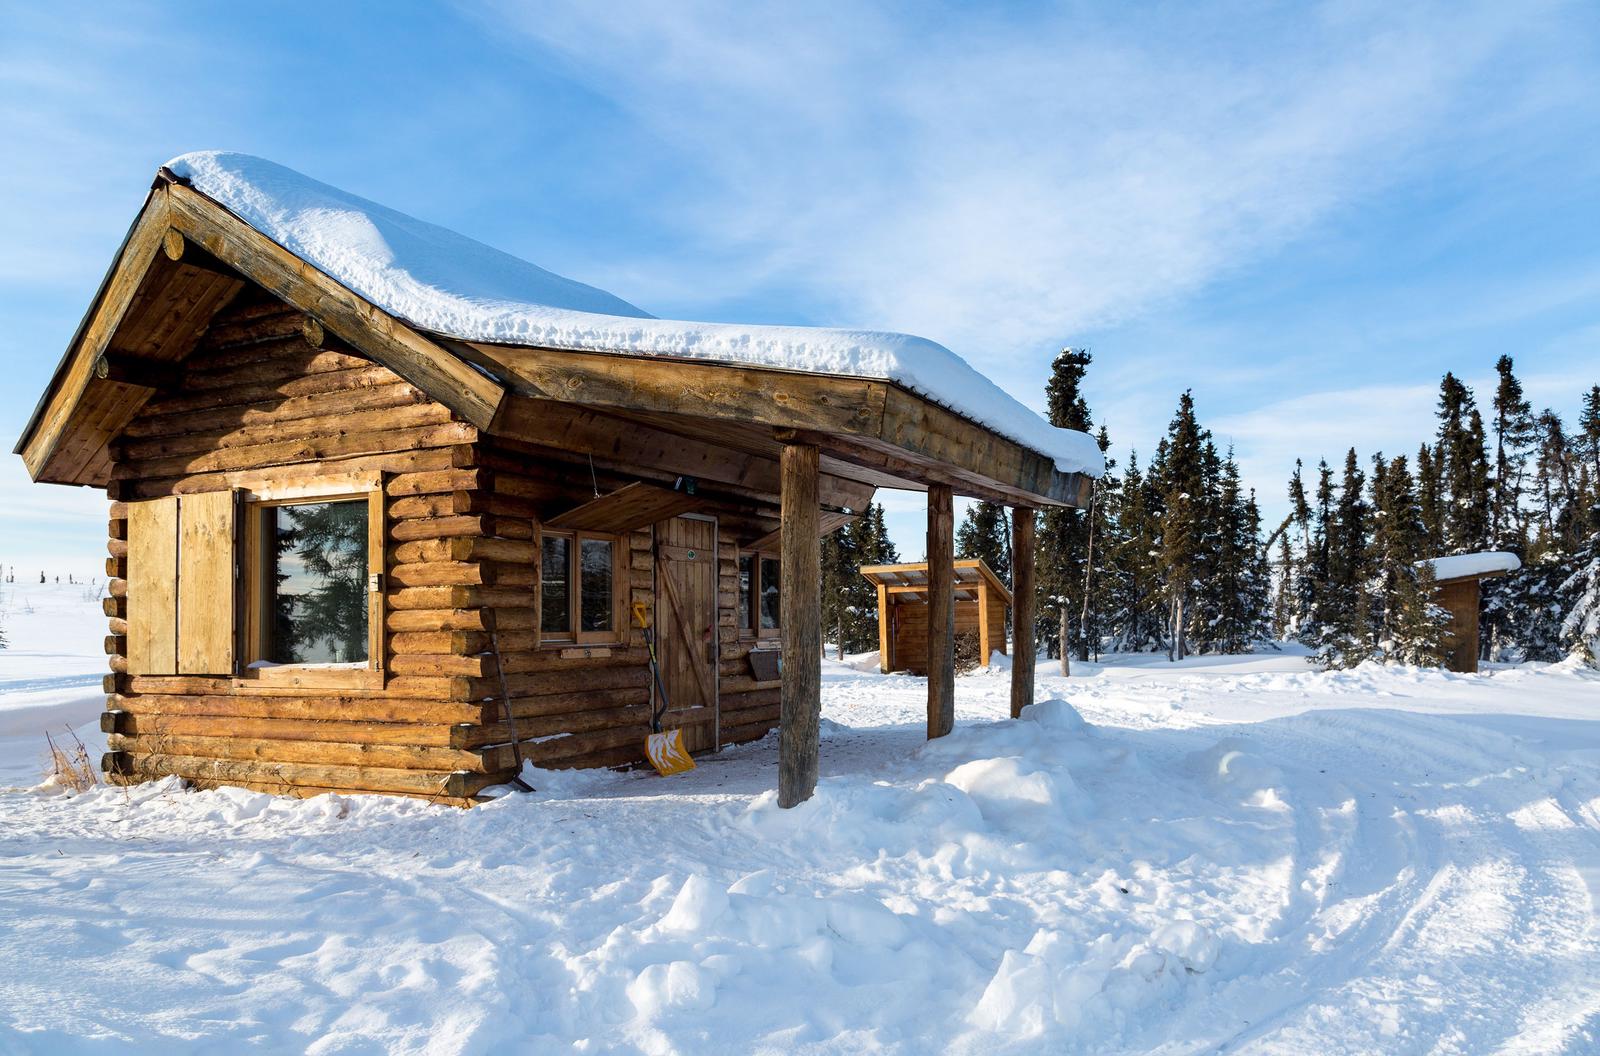 Log cabin surrounded by snow in a spruce forestFront view of Colorado Creek Cabin